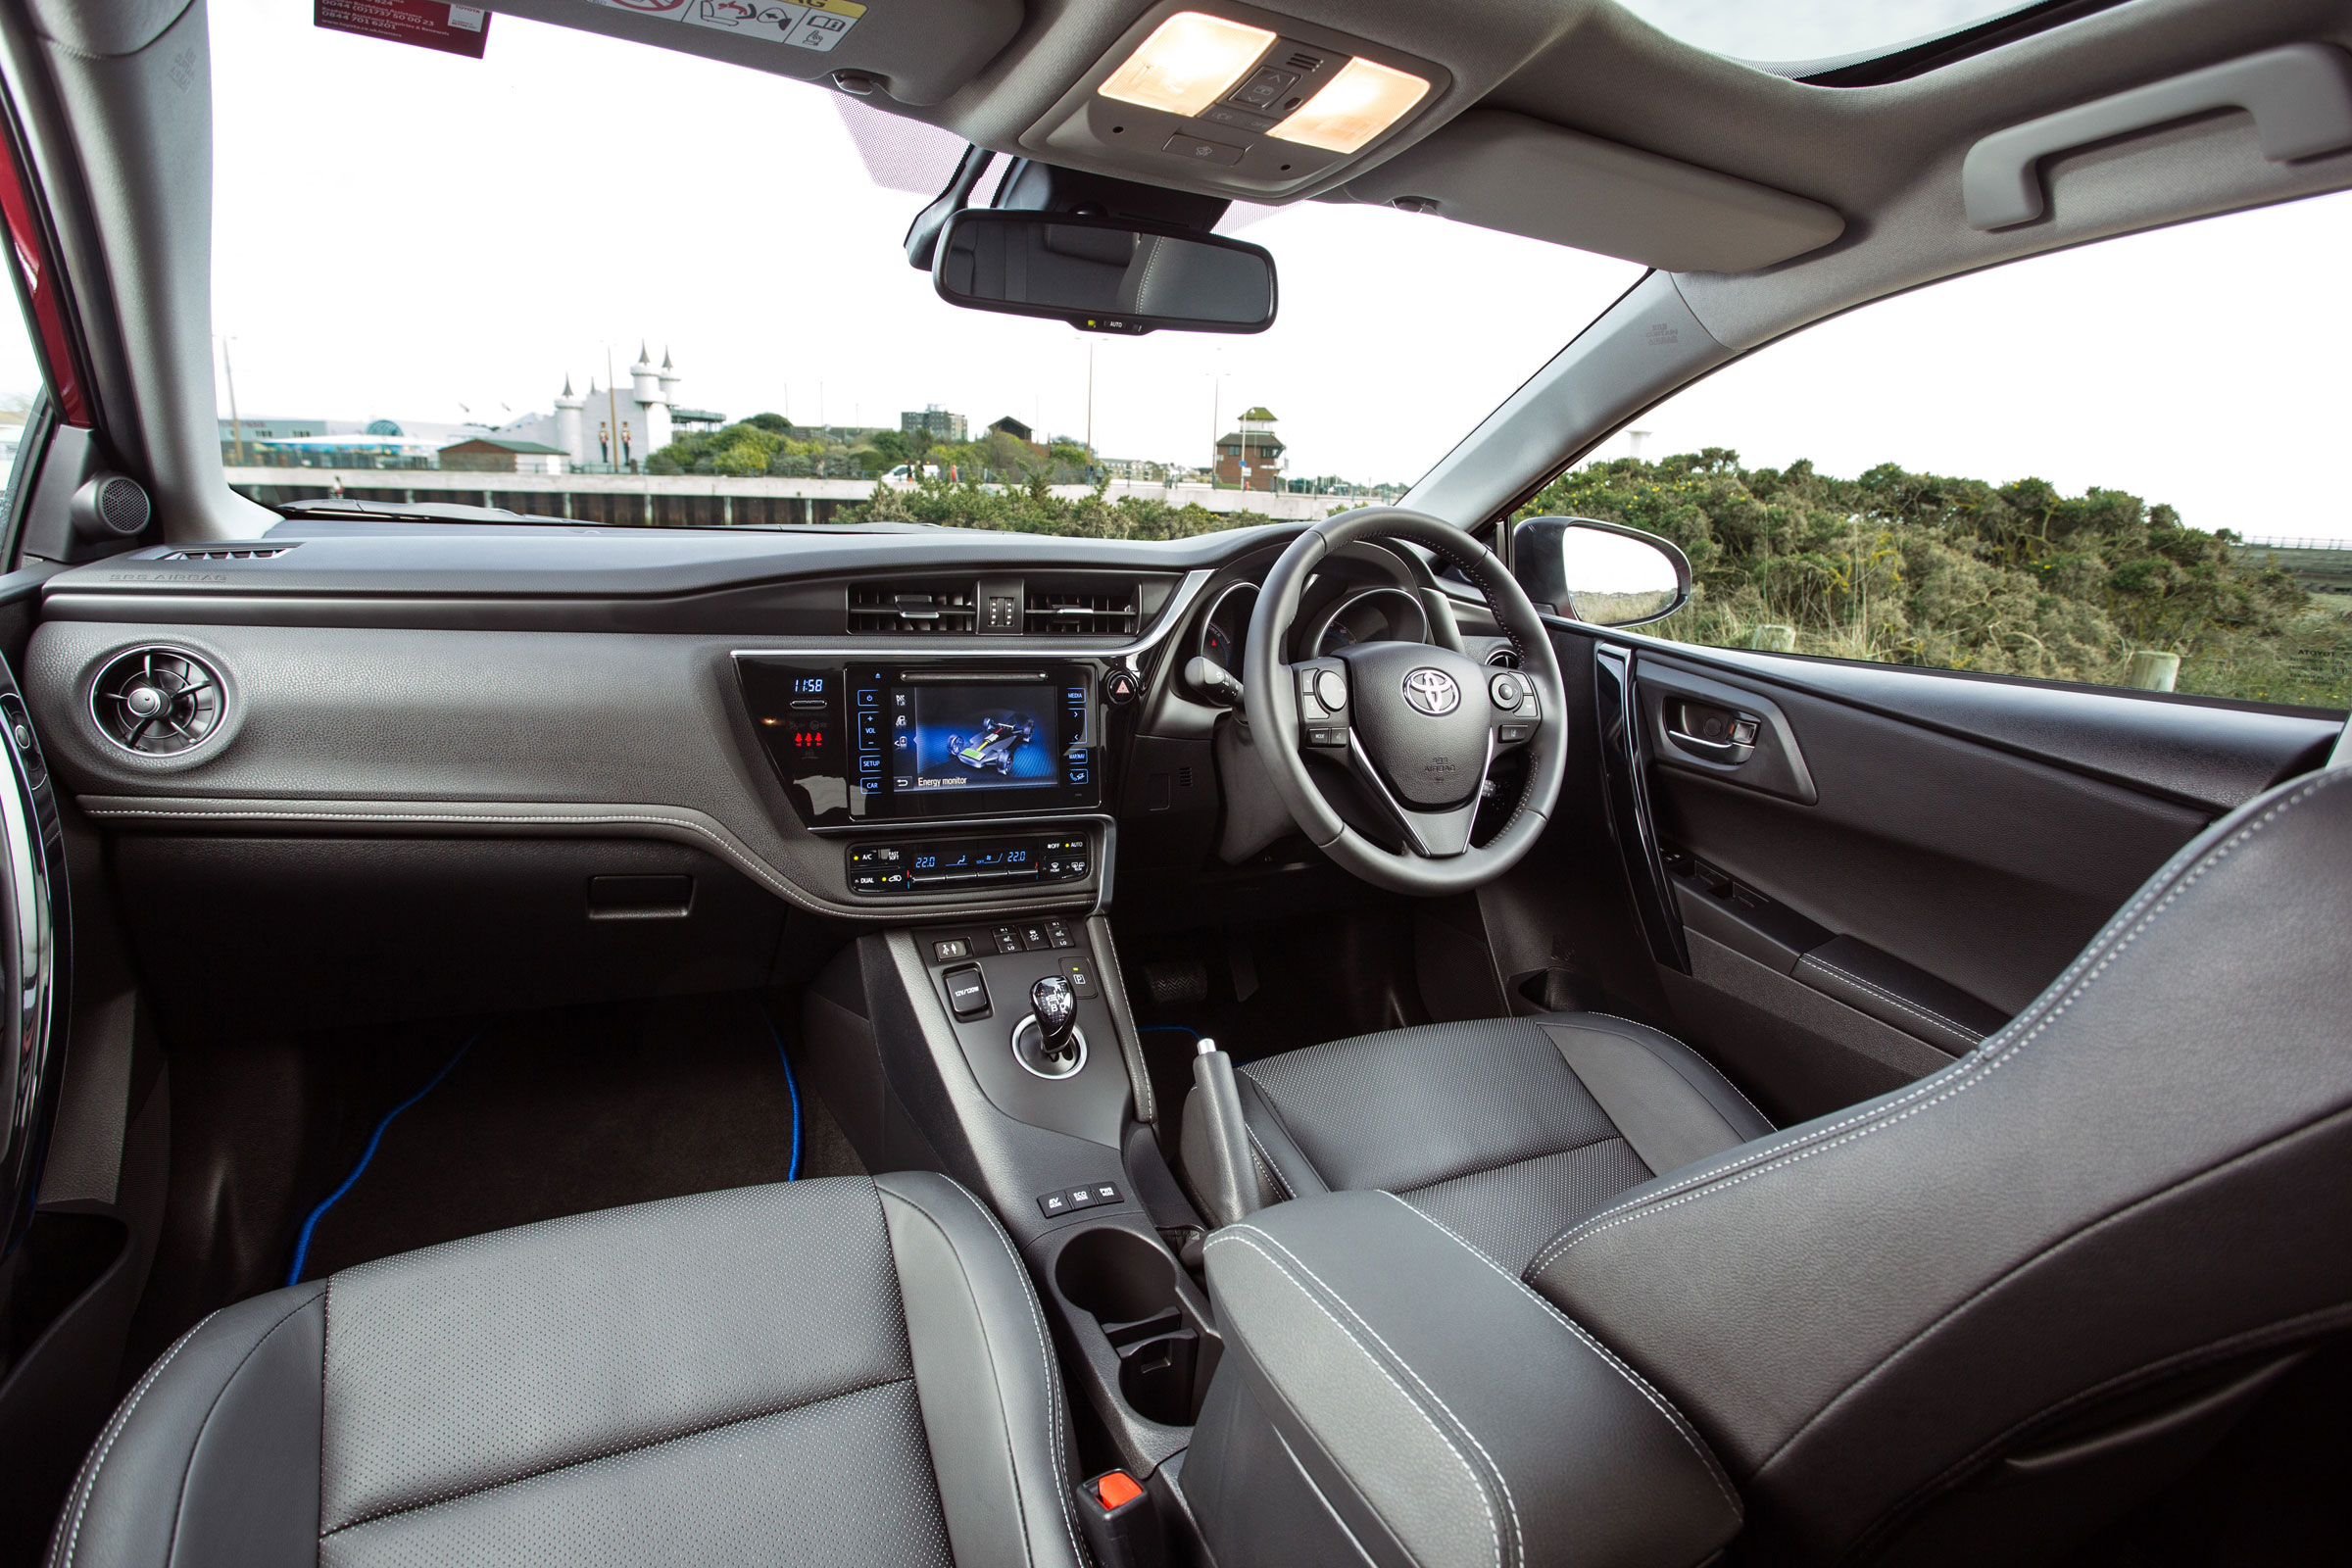 New face and interior for Toyota Auris - car and motoring news by